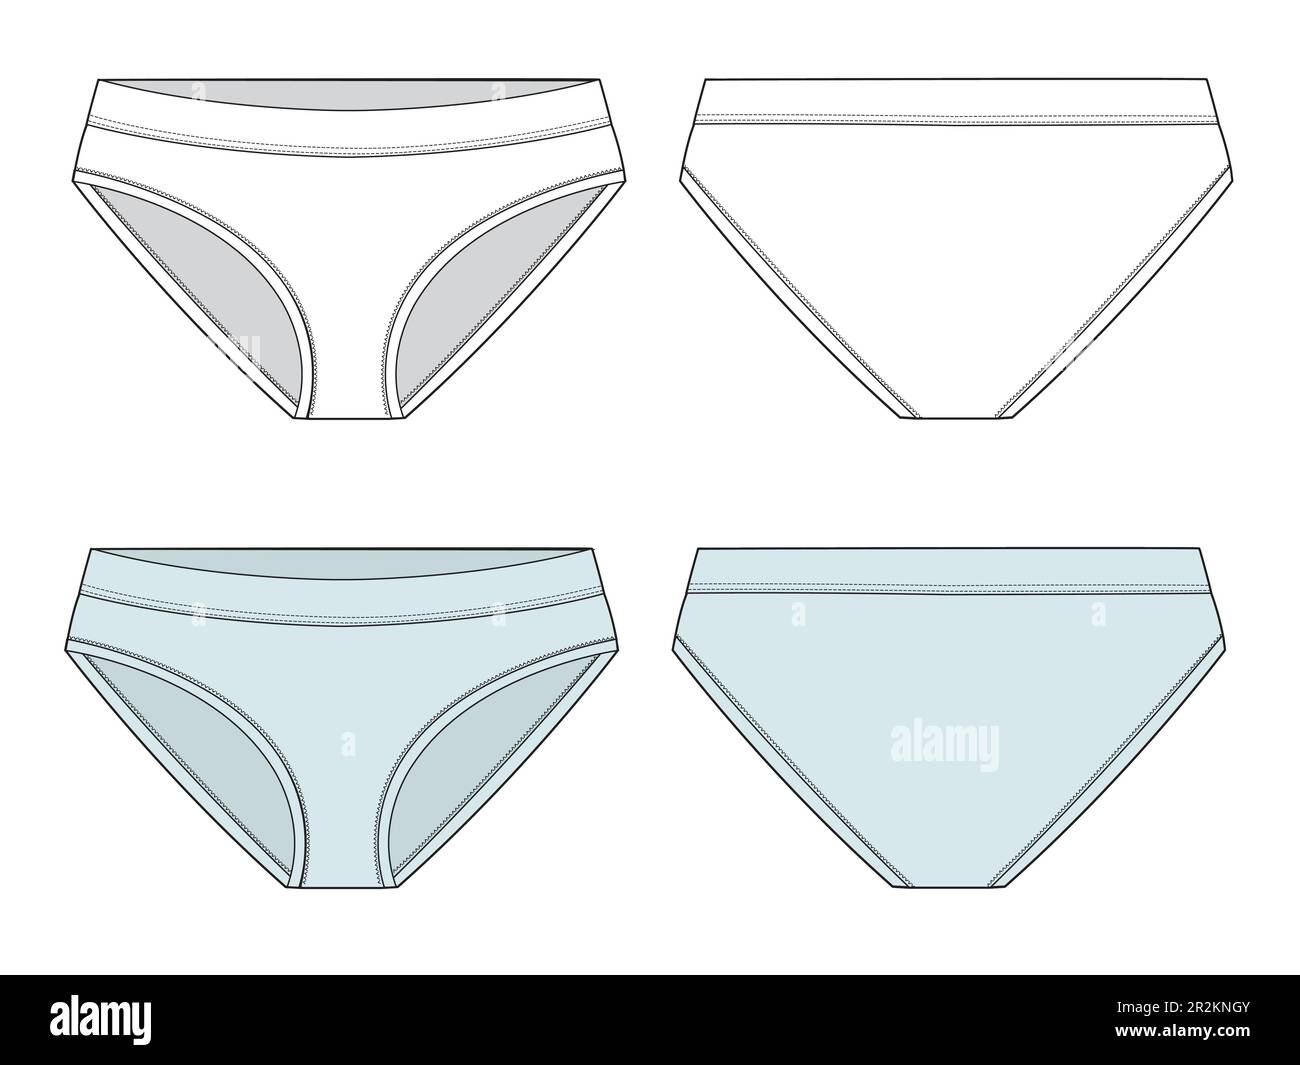 Briefs mockup Cut Out Stock Images & Pictures - Alamy